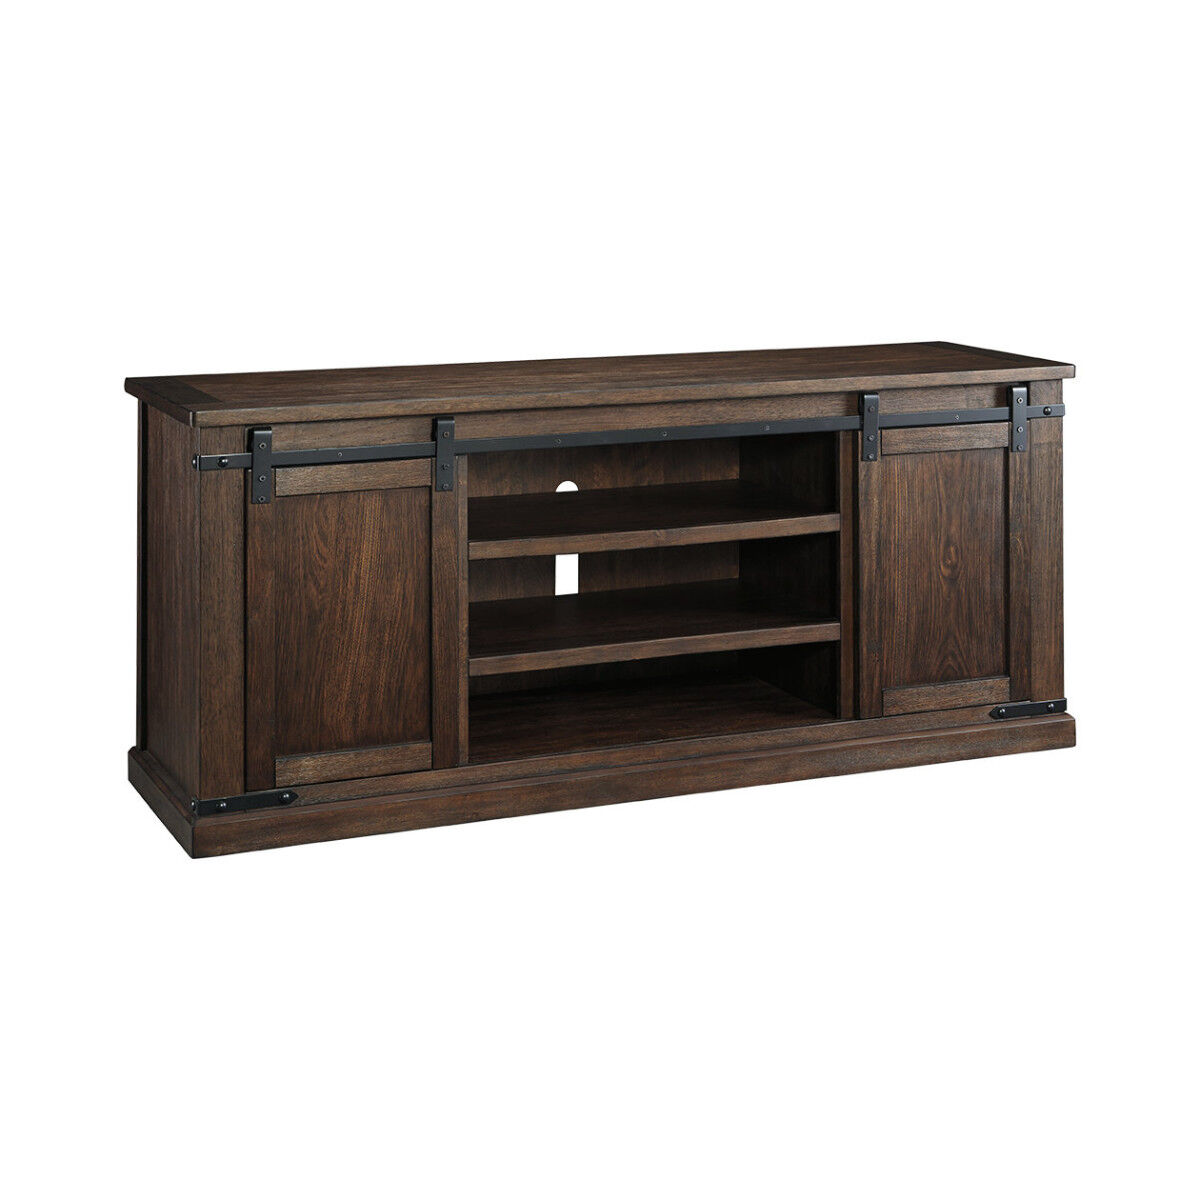 Spacious Wooden TV Stand with Two Sliding Barn Door Storage, Extra Large, Rustic Brown